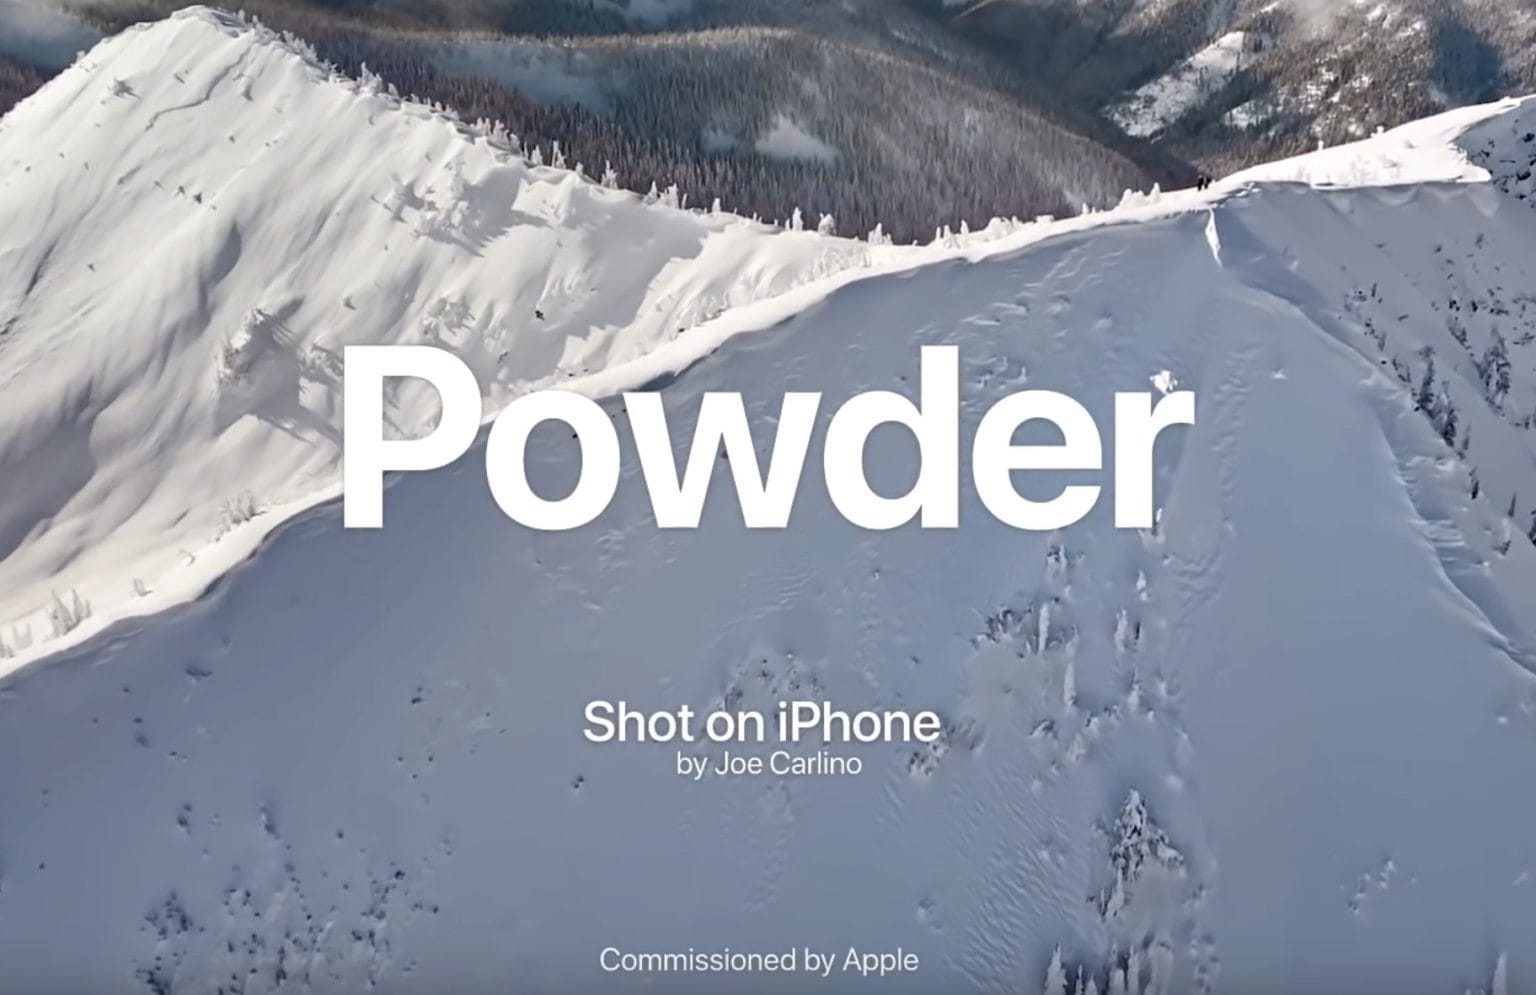 Exclusive: Videographer behind latest Apple ad talks shooting snowboarding on iPhone